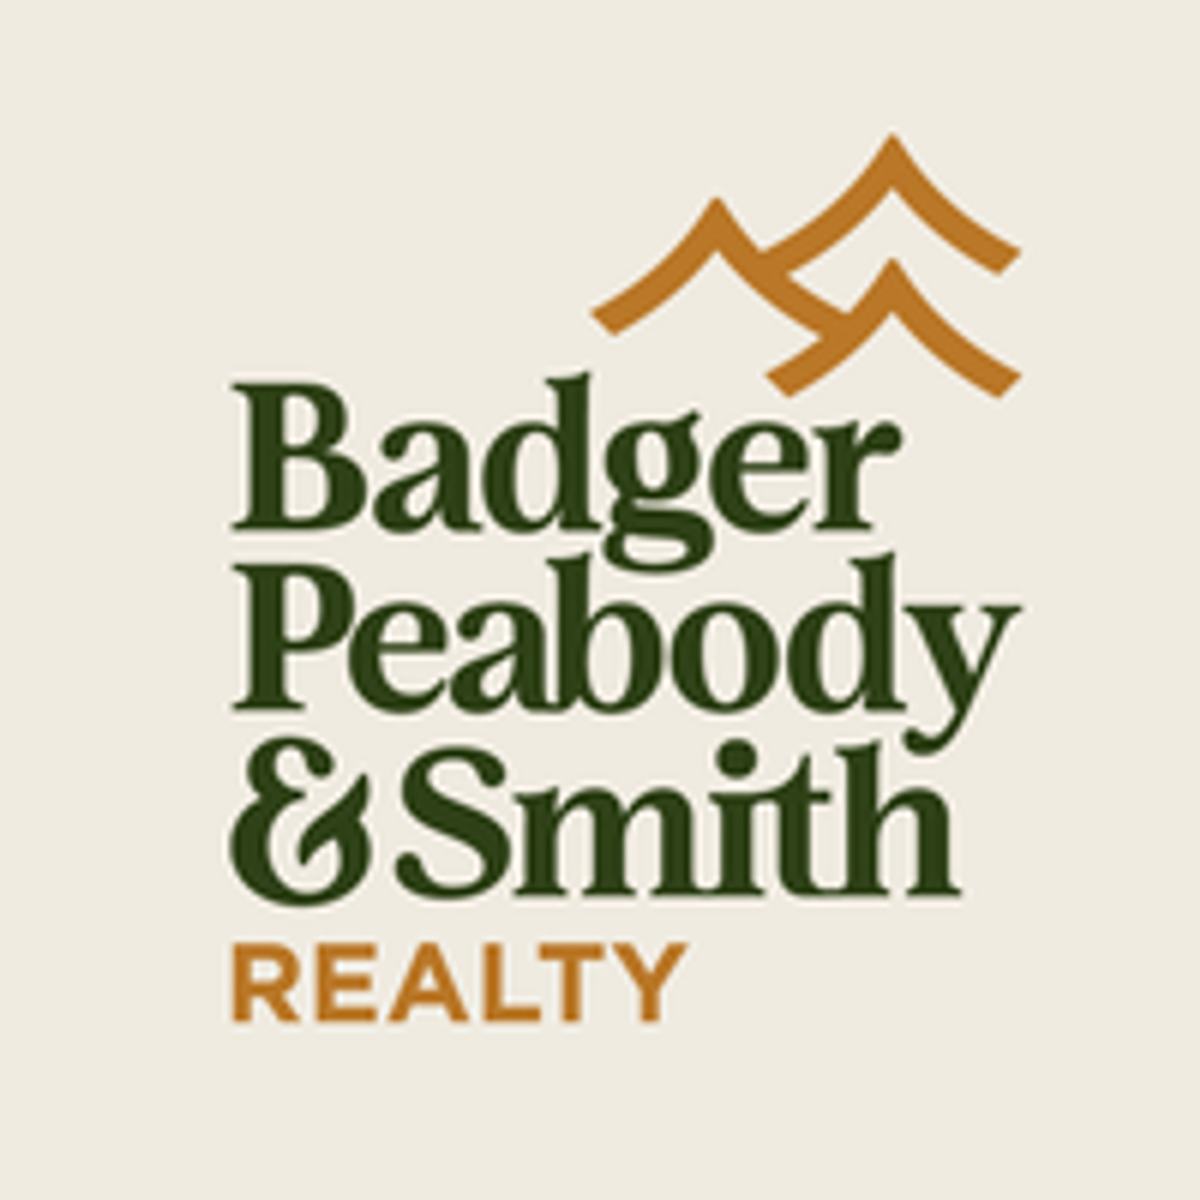 Photo for Jerrod Mitchell, Listing Agent at Badger Peabody & Smith Realty/Holderness